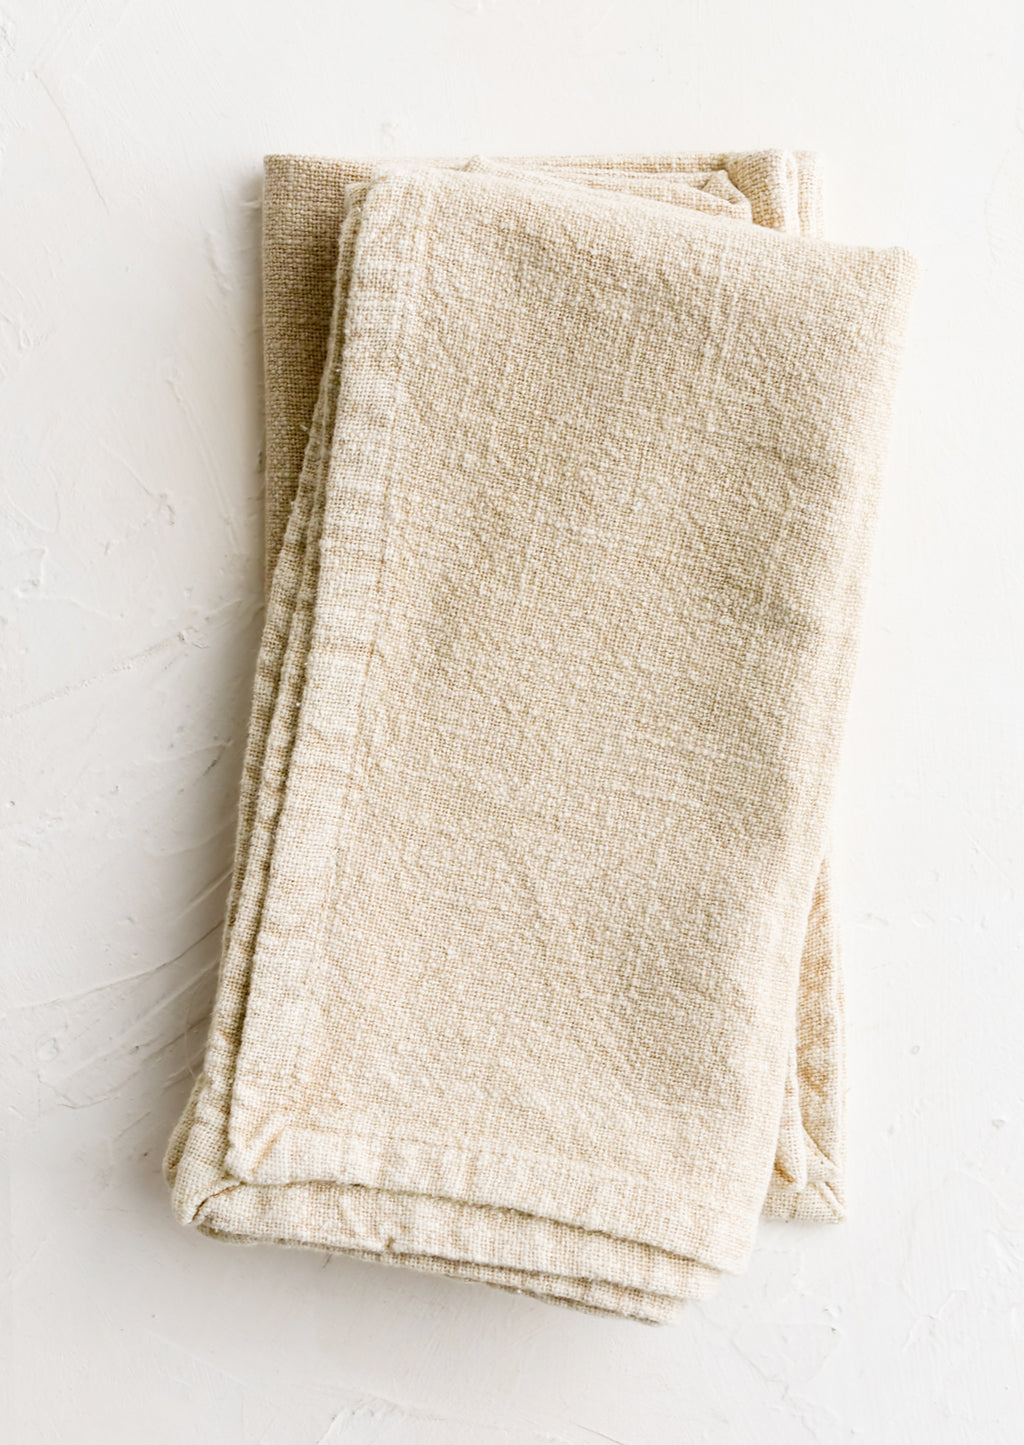 Oatmeal: A pair of stonewashed napkins in oatmeal.